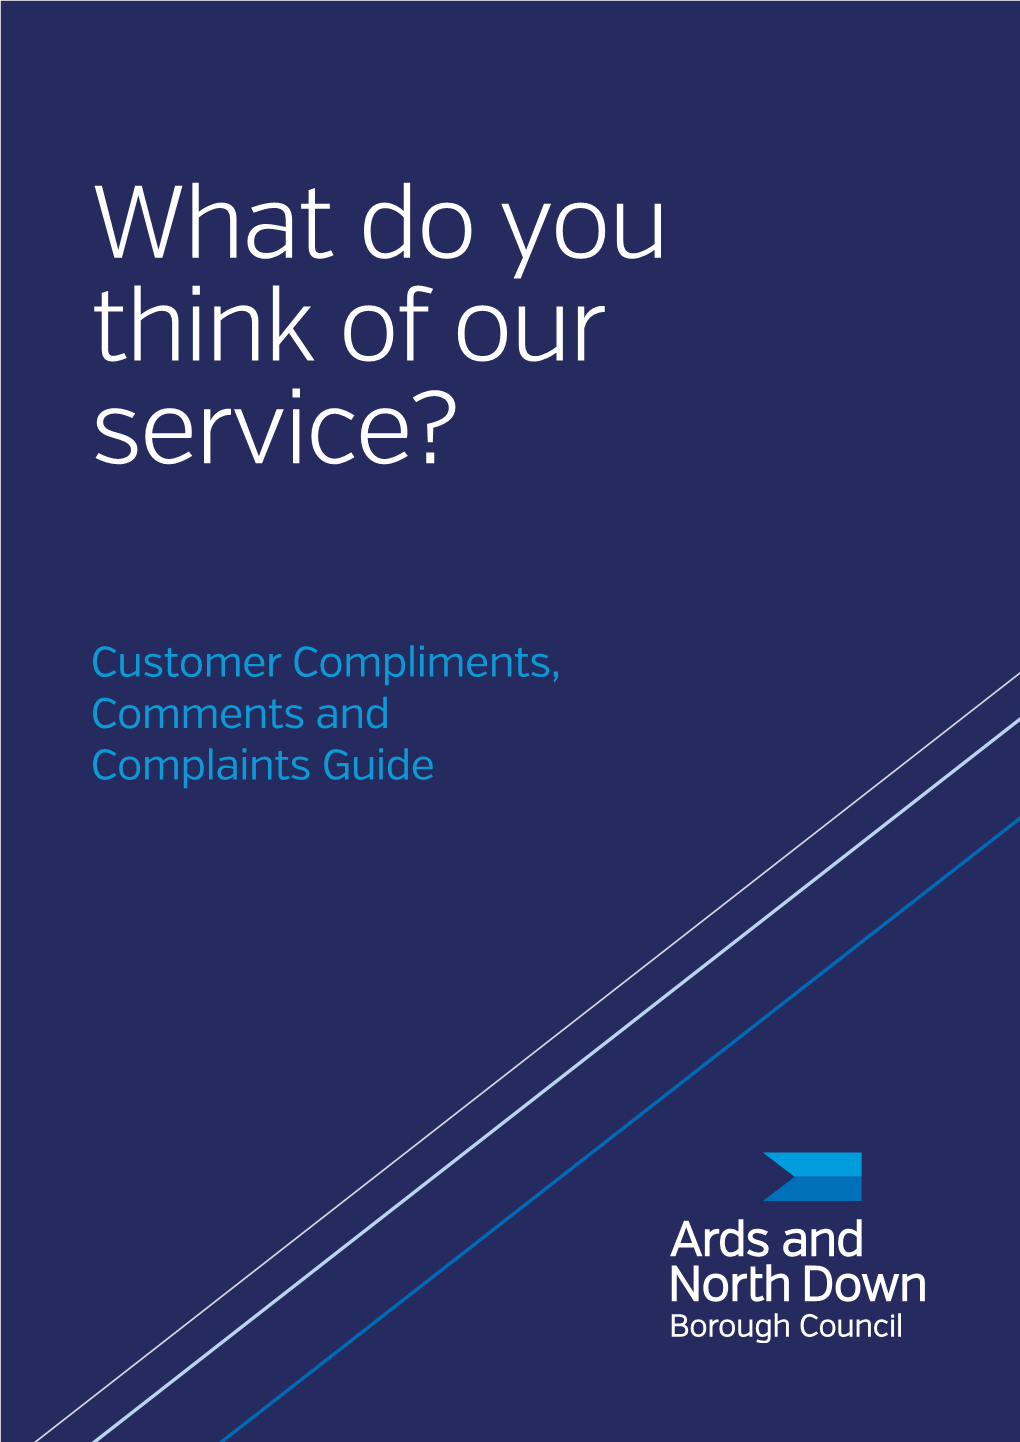 What Do You Think of Our Service?